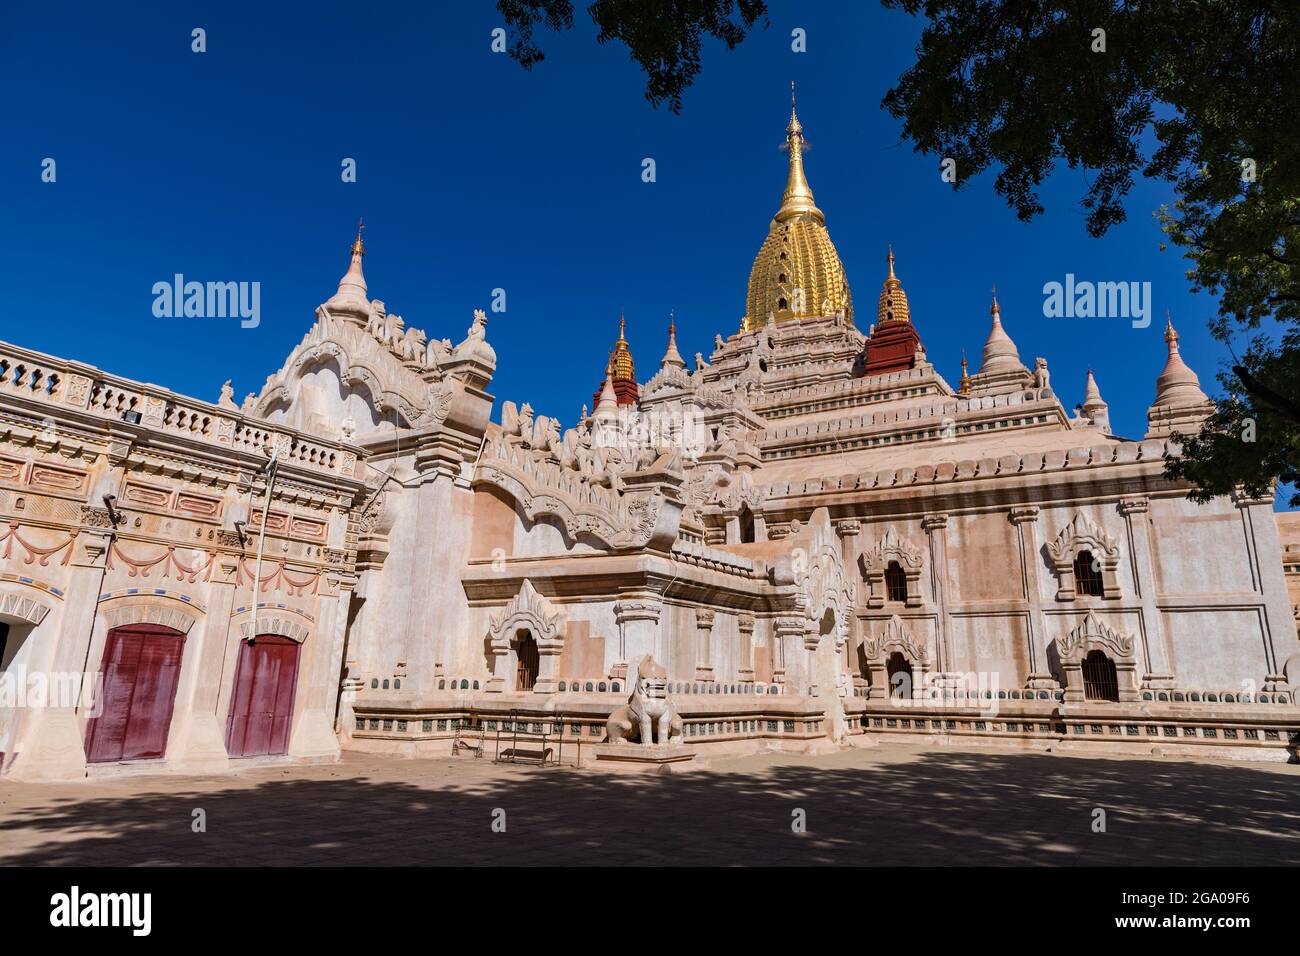 The restored Ananda Temple in the Bagan World Heritage Site in Myanmar Stock Photo